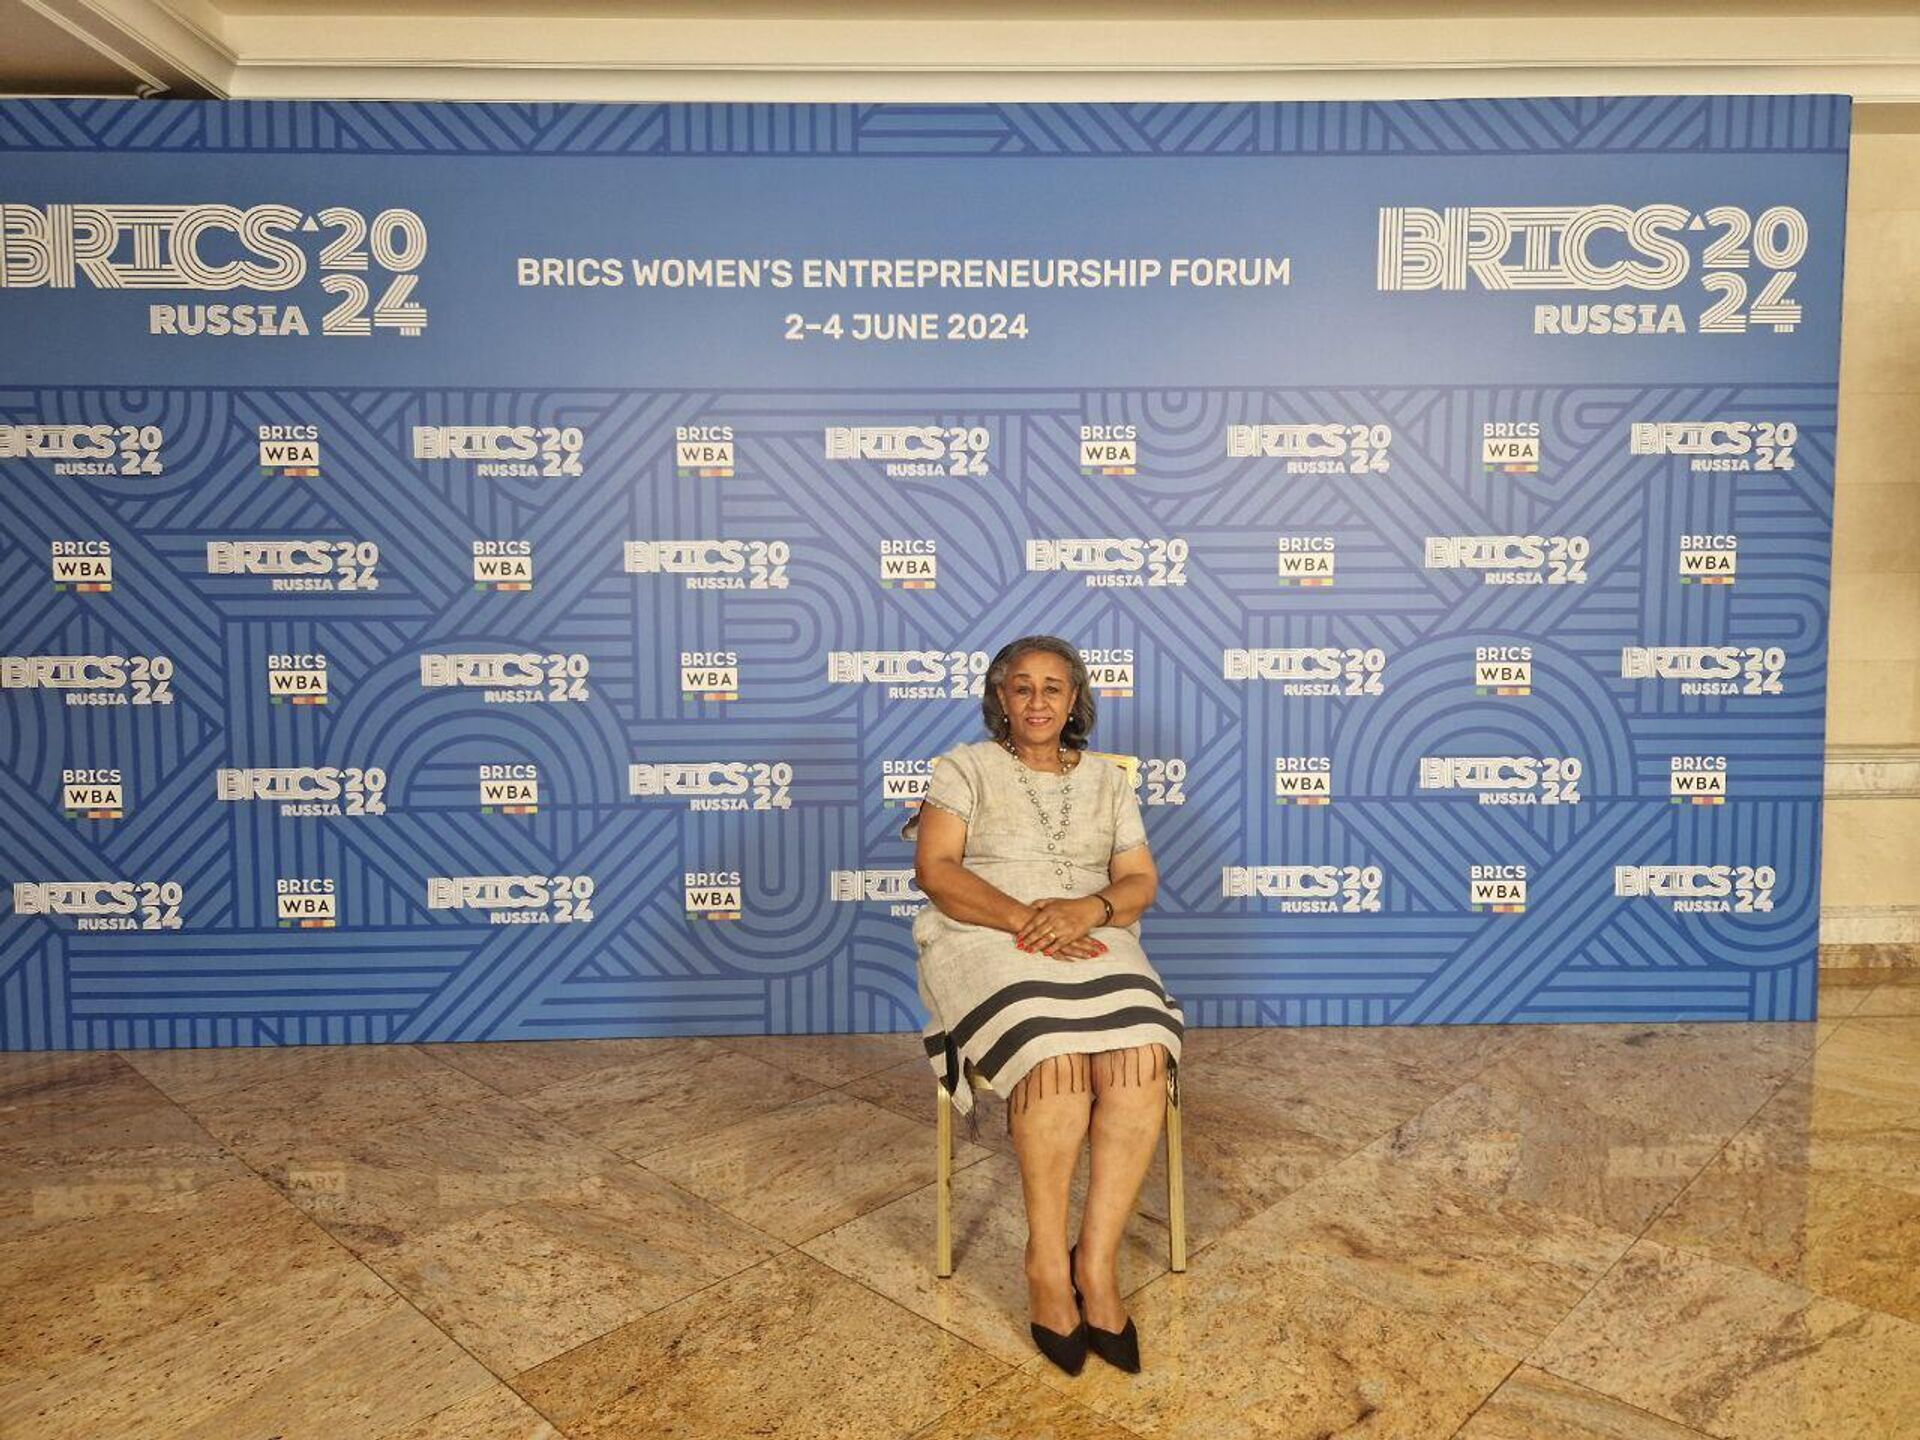 Nigest Haile, Founder and Executive Director of the Centre for Accelerated Women’s Economic Empowerment, Ethiopia. - Sputnik Africa, 1920, 04.06.2024